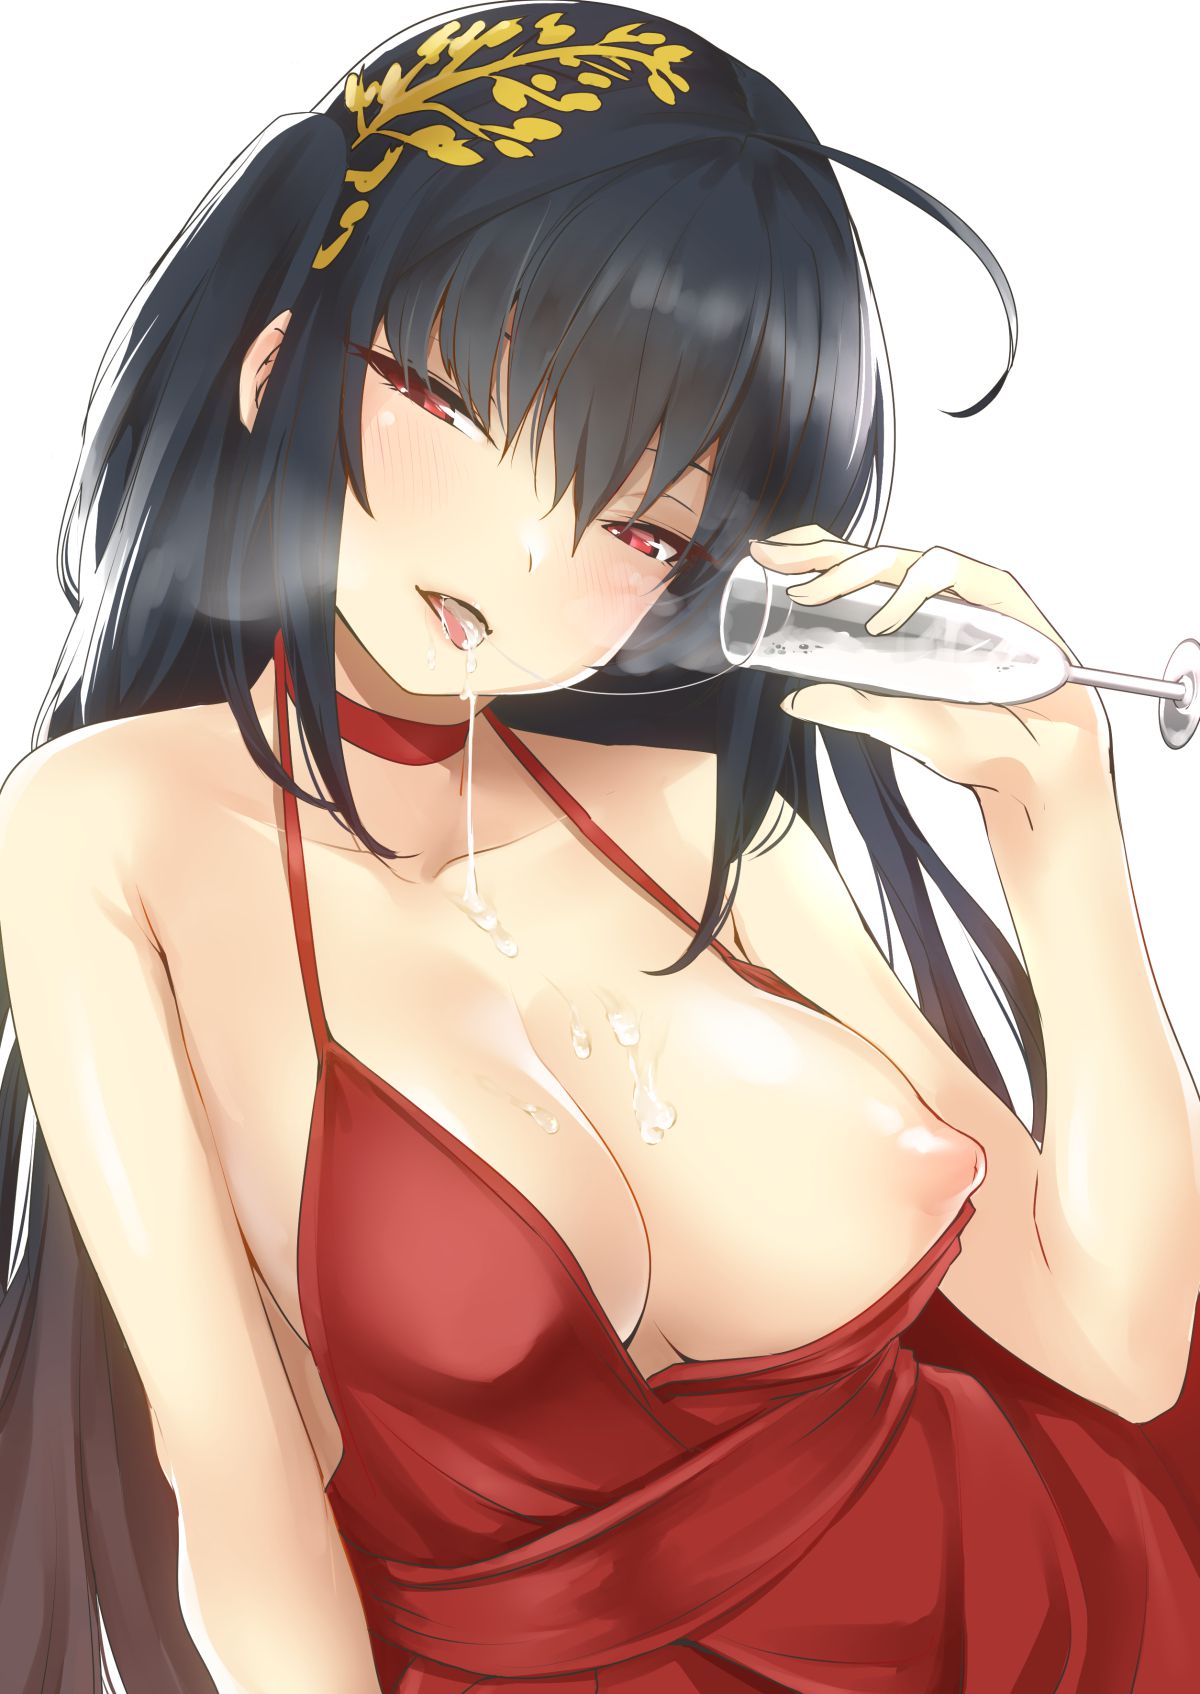 Erotic anime summary Erotic images of beautiful girls who only see single milk [50 pieces] 19